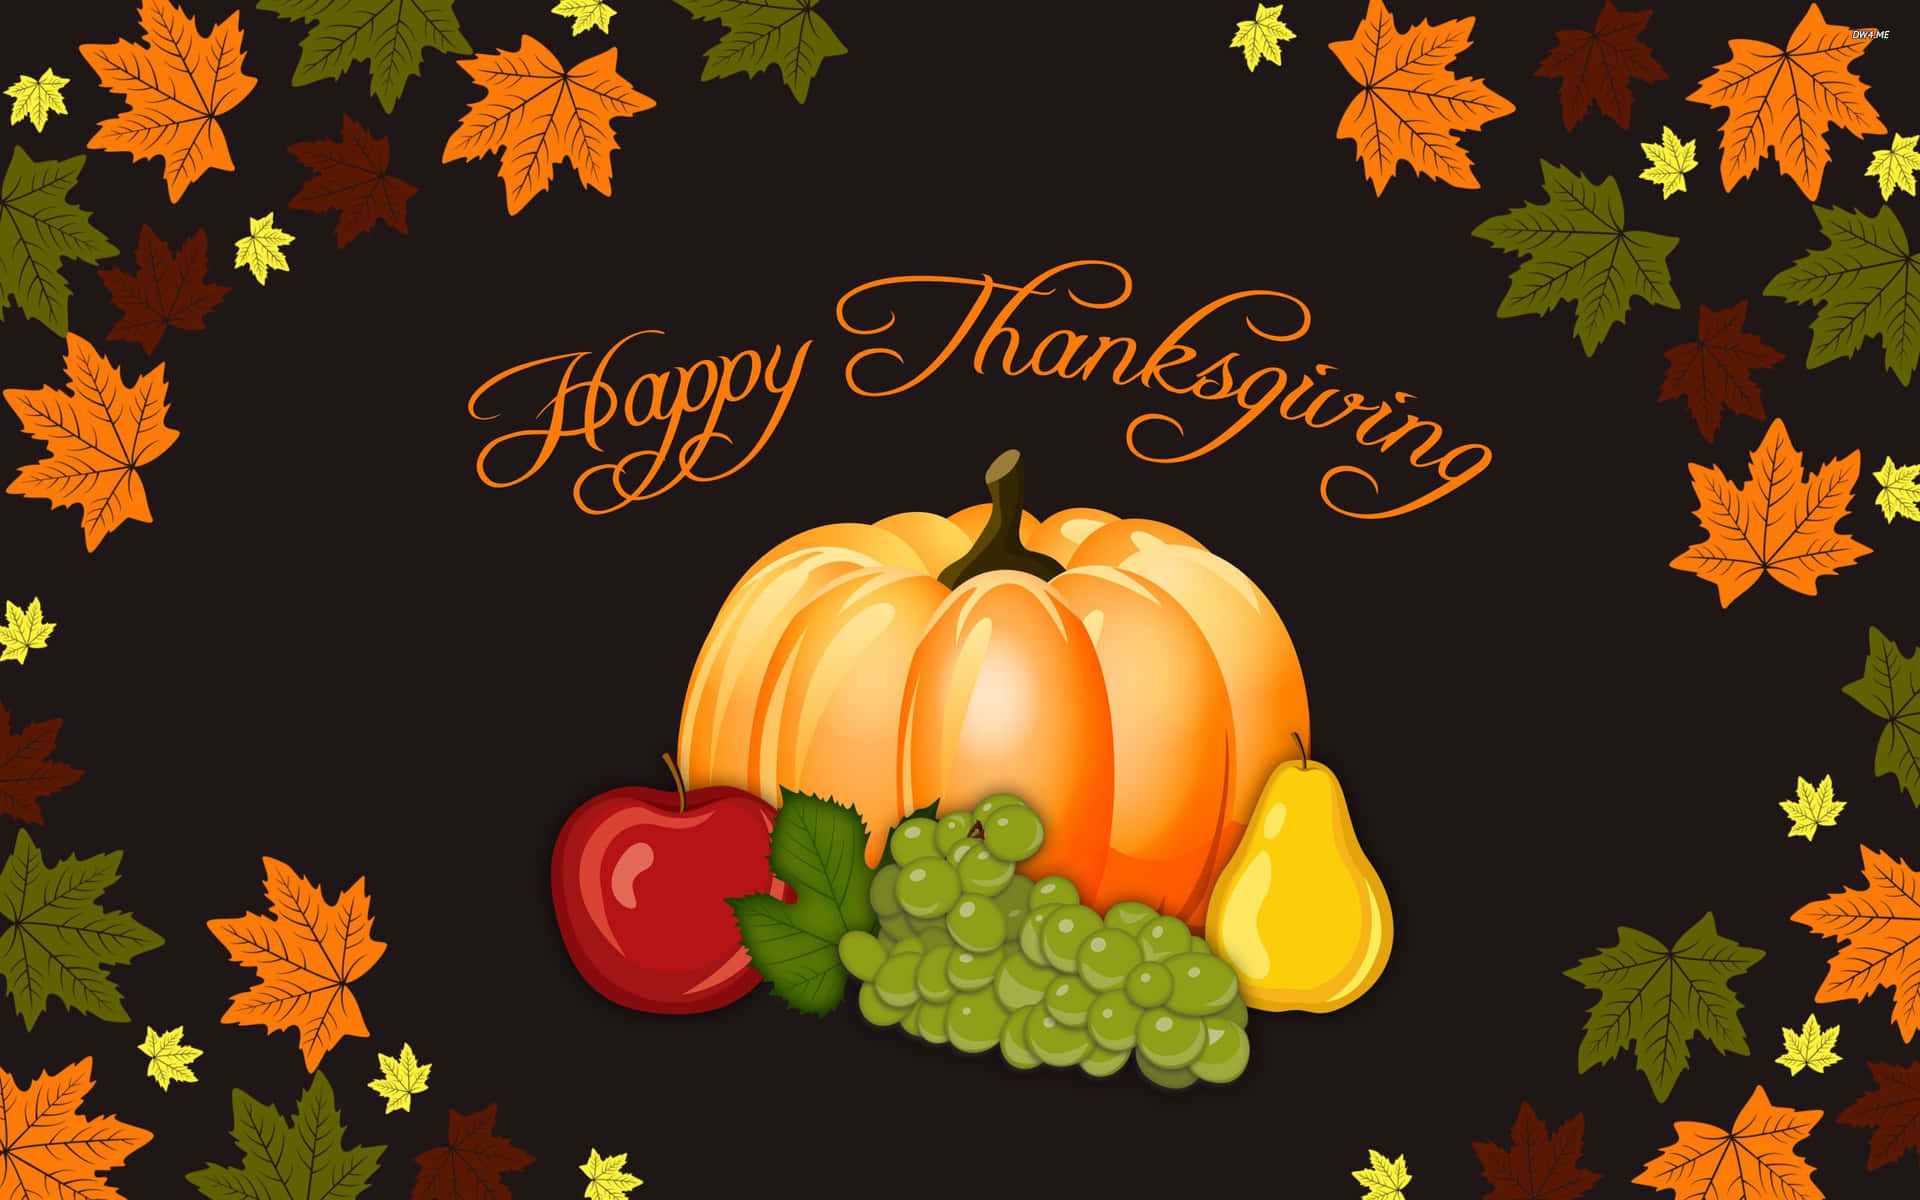 Celebrate the Harvest with a Beautiful Thanksgiving Wallpaper